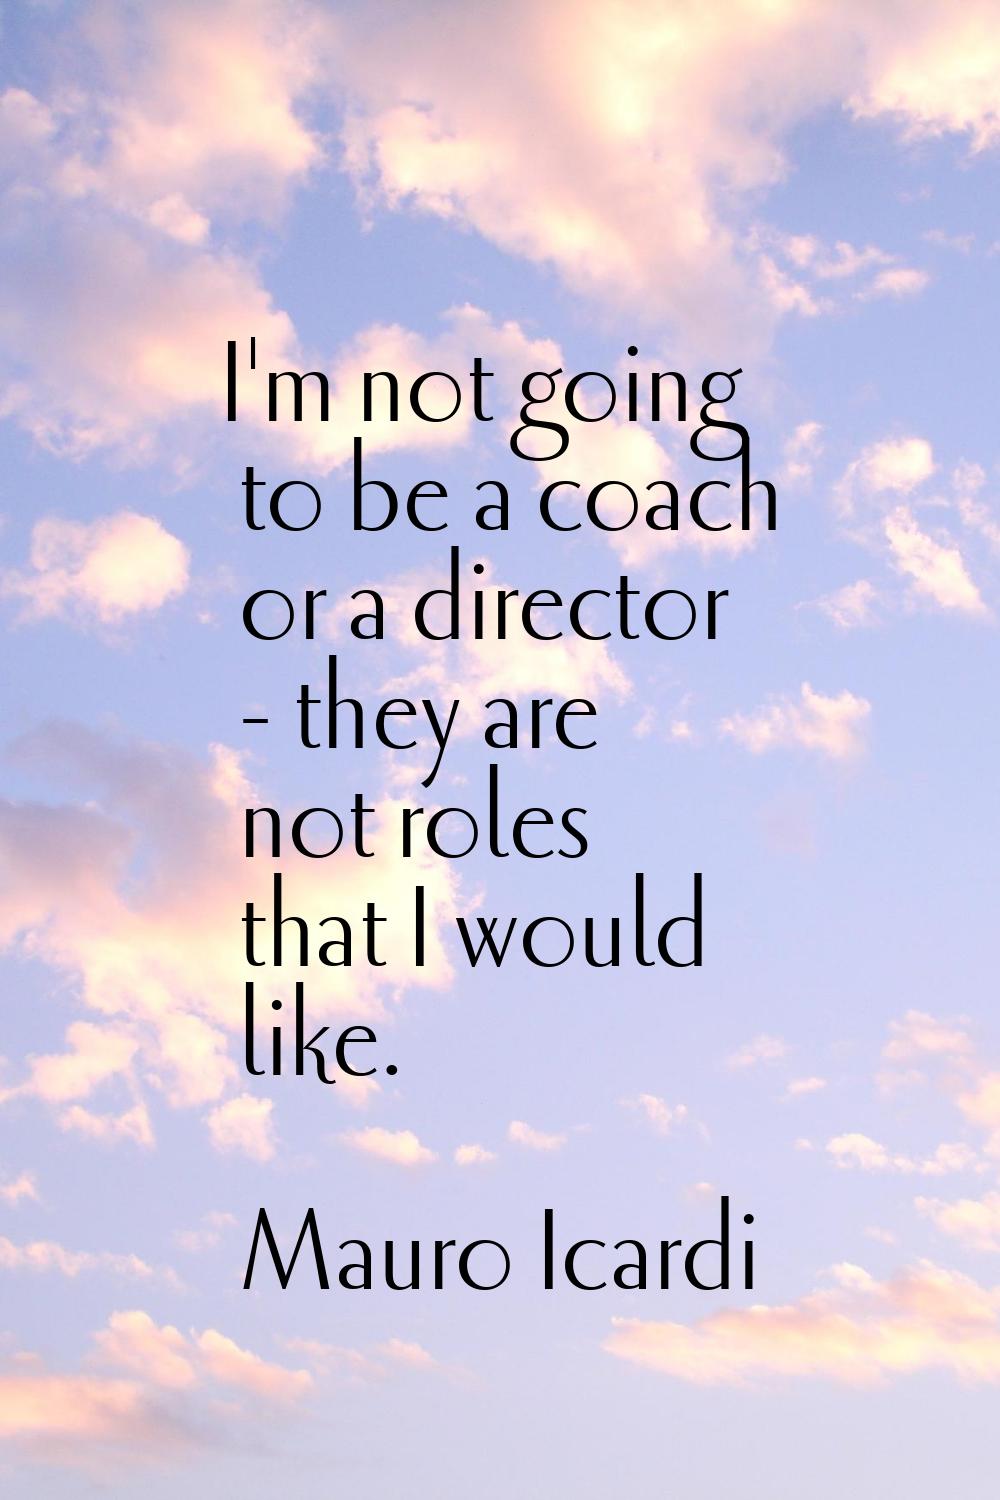 I'm not going to be a coach or a director - they are not roles that I would like.